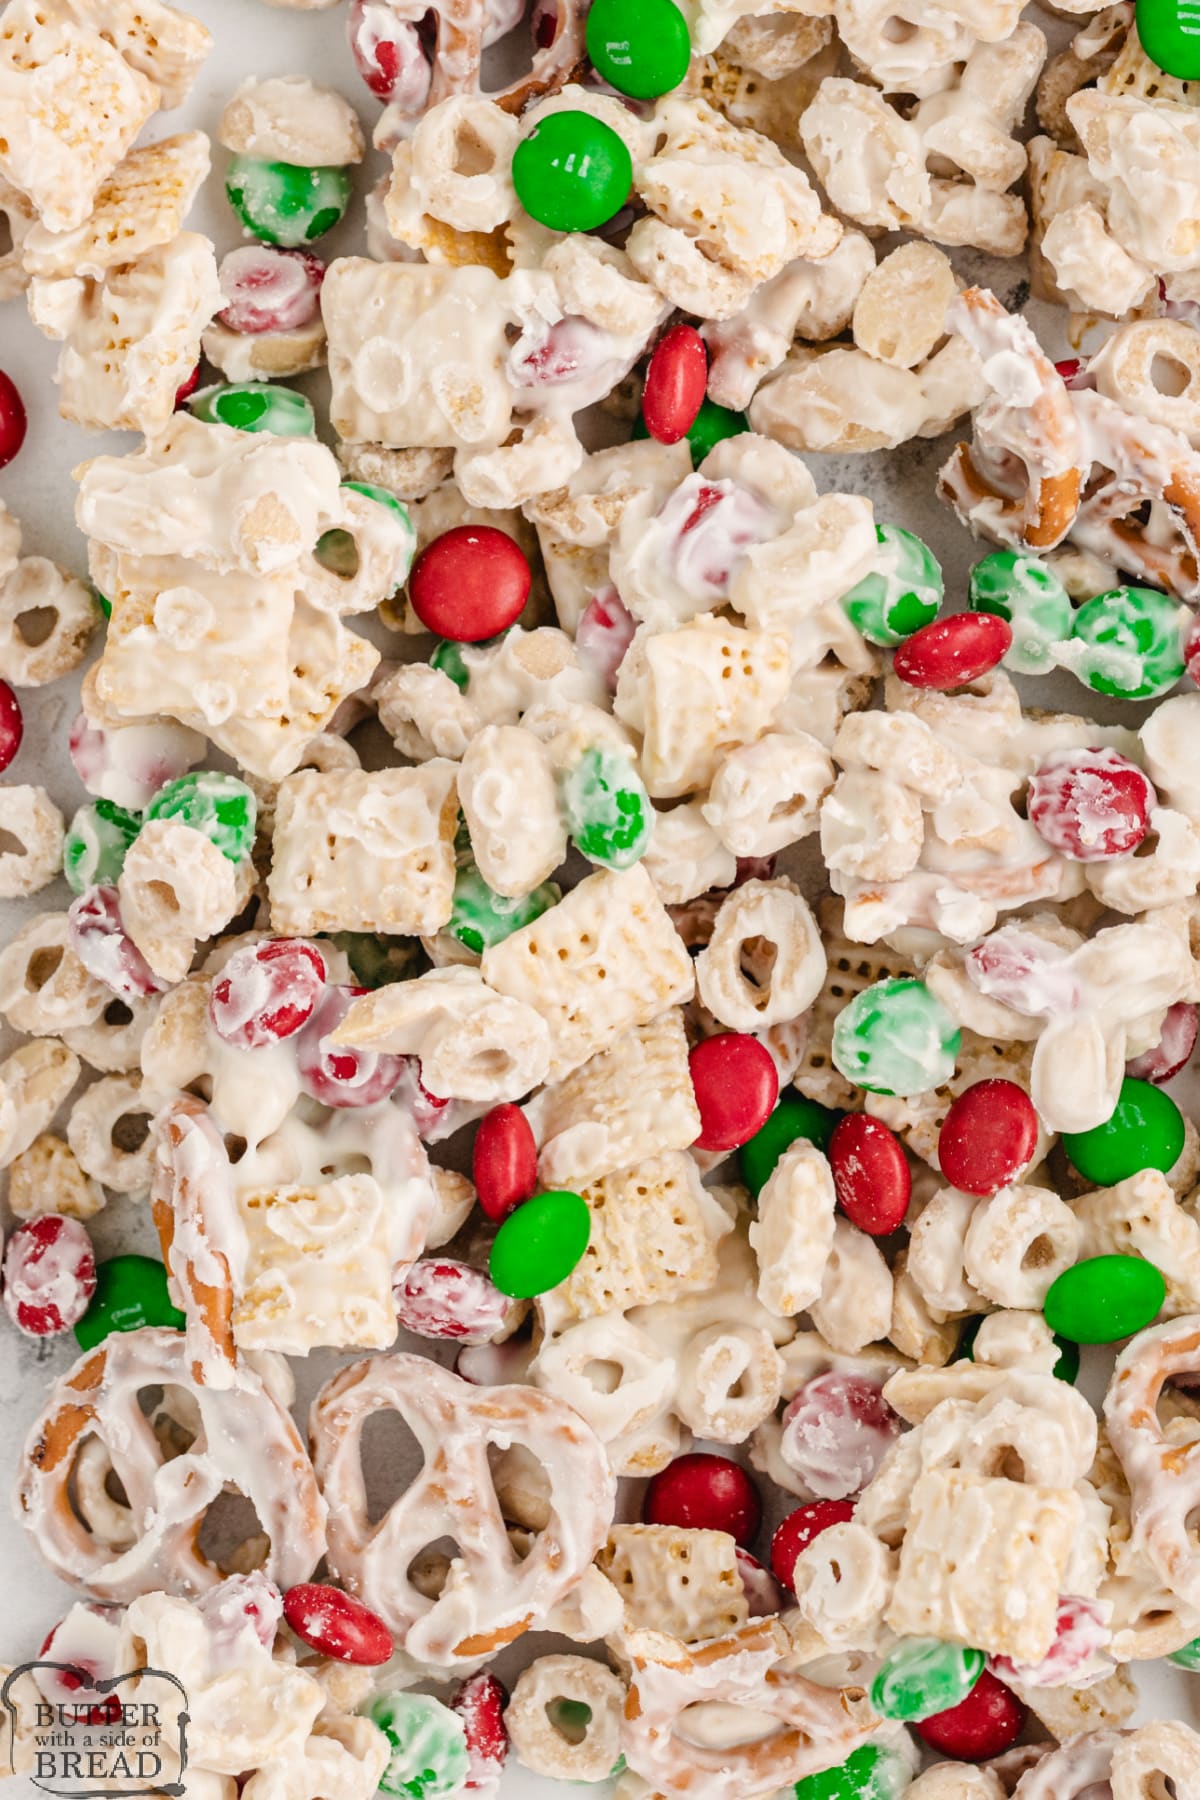 White Chocolate Chex Mix is made with cereal, pretzels, peanuts and M&Ms all coated in white chocolate. This easy white chocolate chex mix recipe is salty and sweet and comes together in less than 5 minutes!